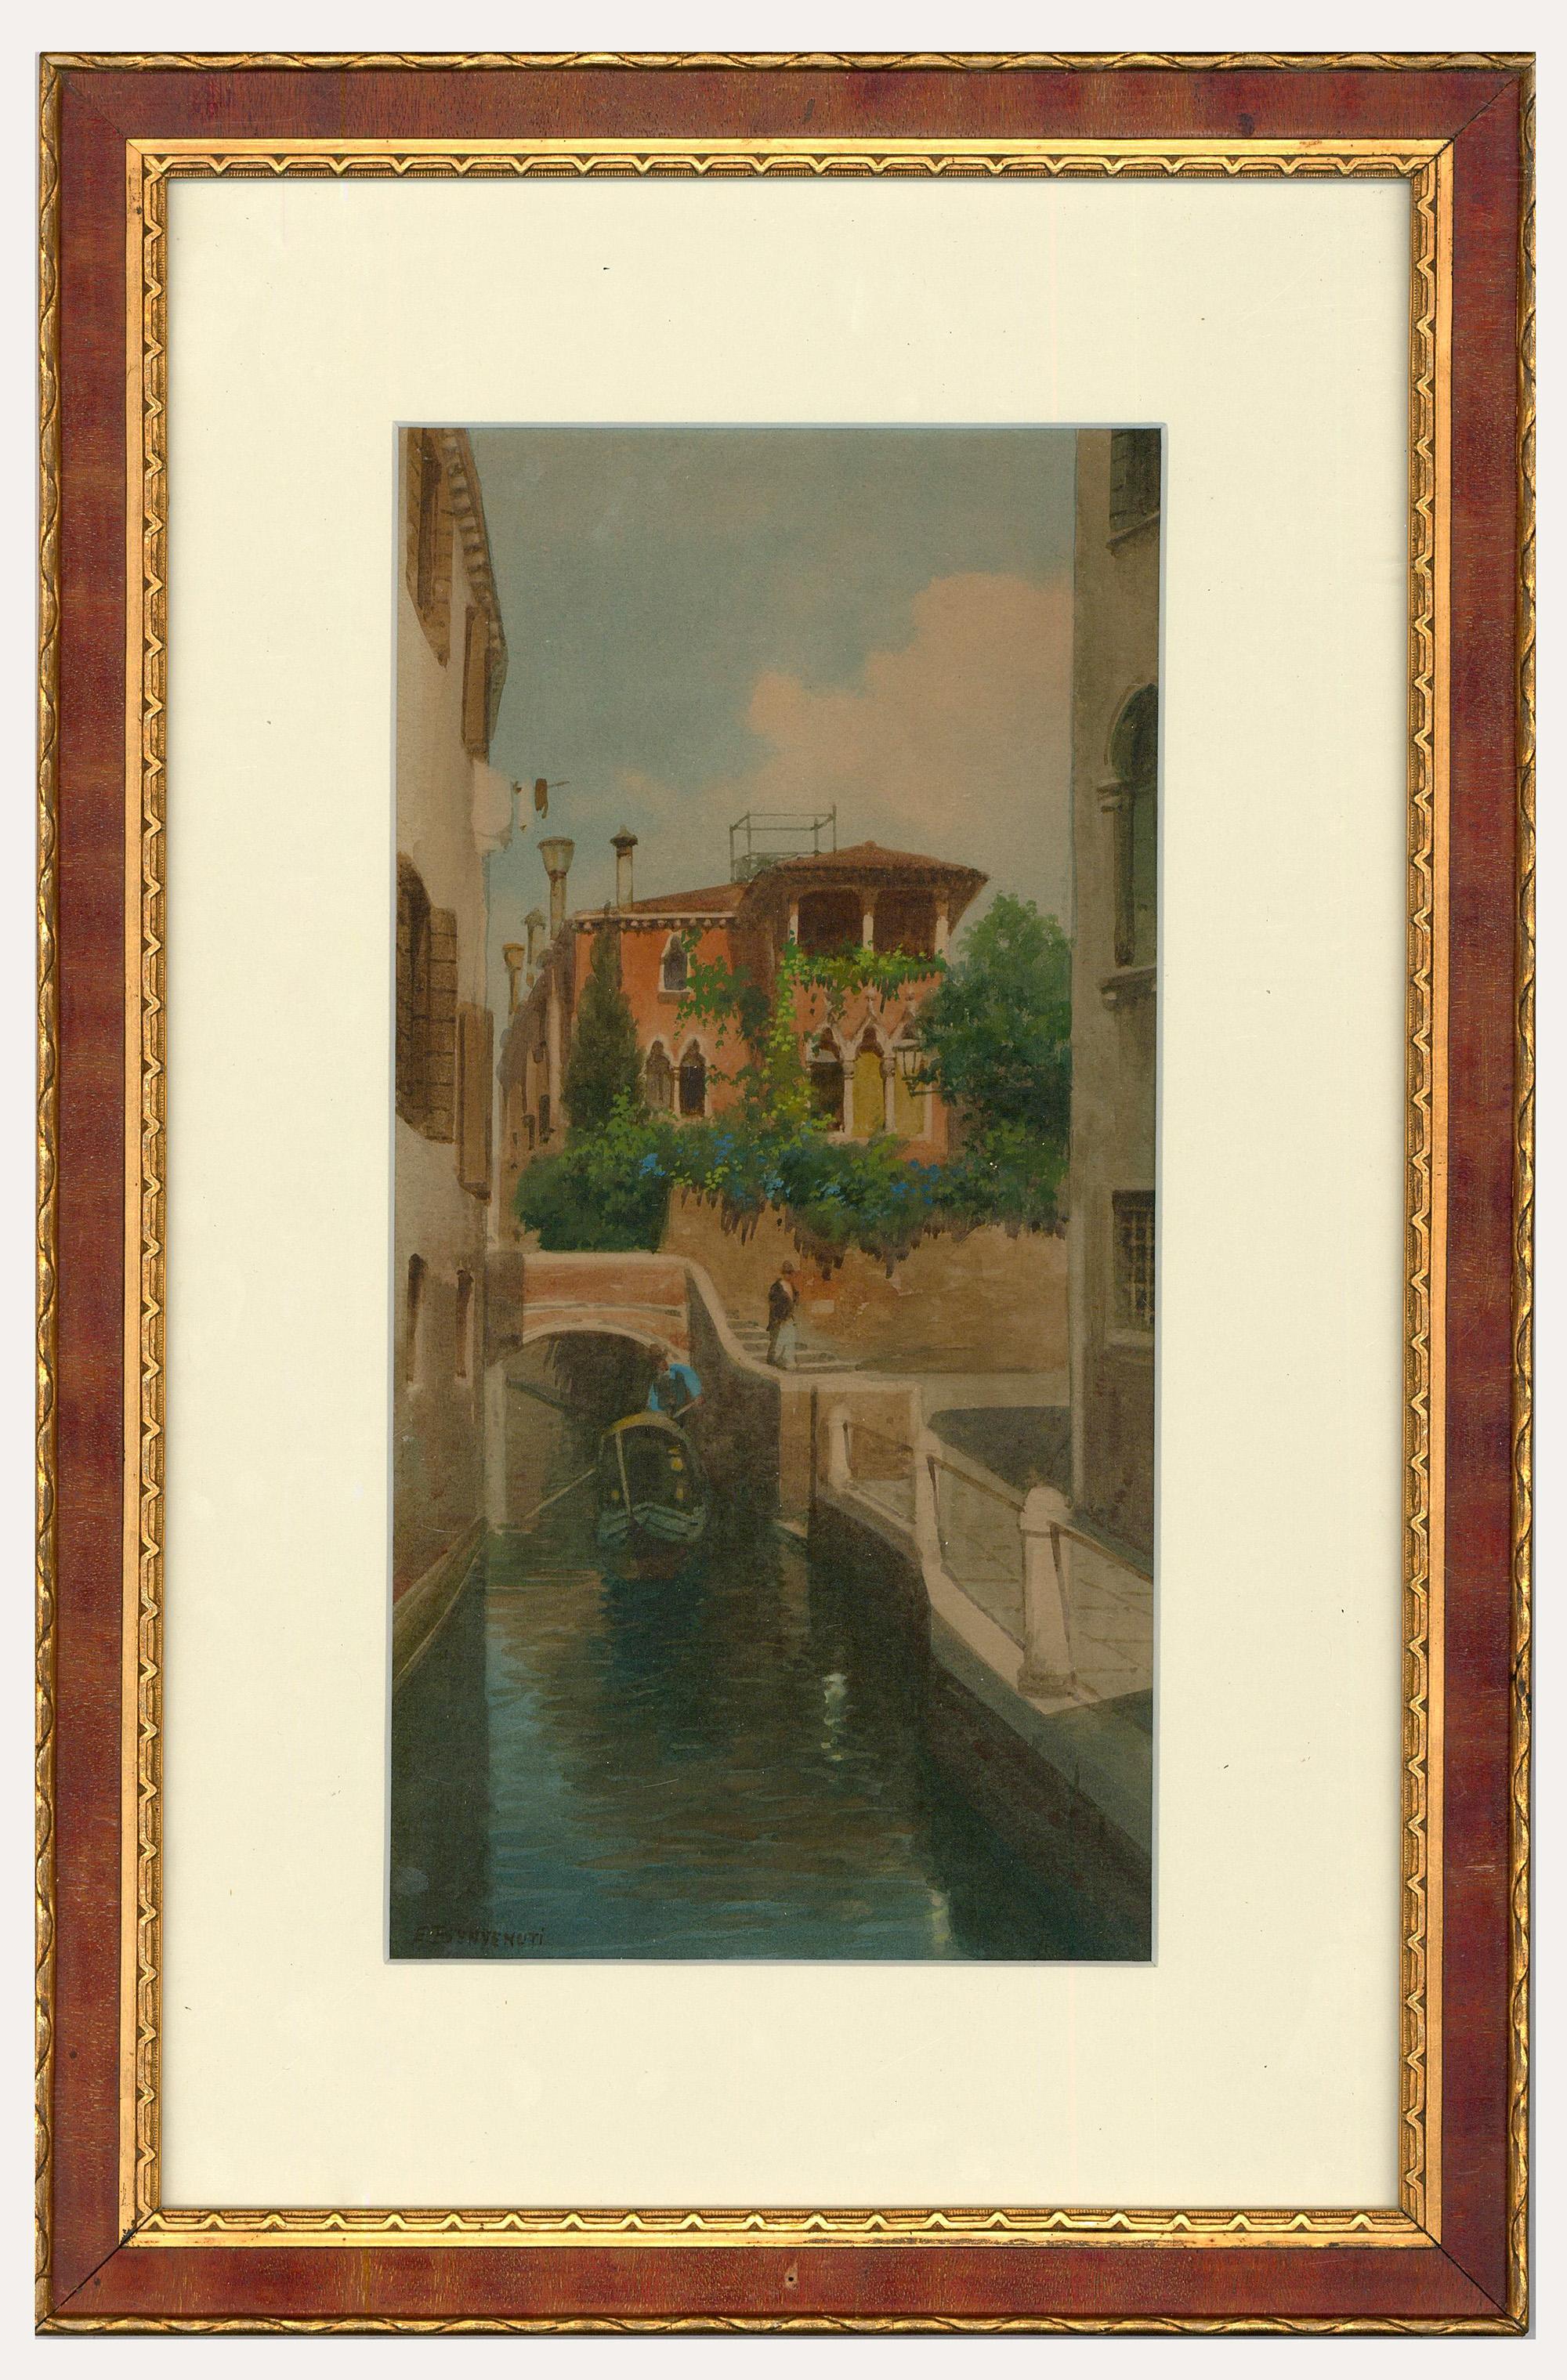 An accomplished watercolour by the well-listed Italian artist Eugenio Benvenuti. The scene depicts an evening view in Venice, with gondola travelling along the canal. Benvenuti's sensitive depiction of reflective water is typical of his work. The